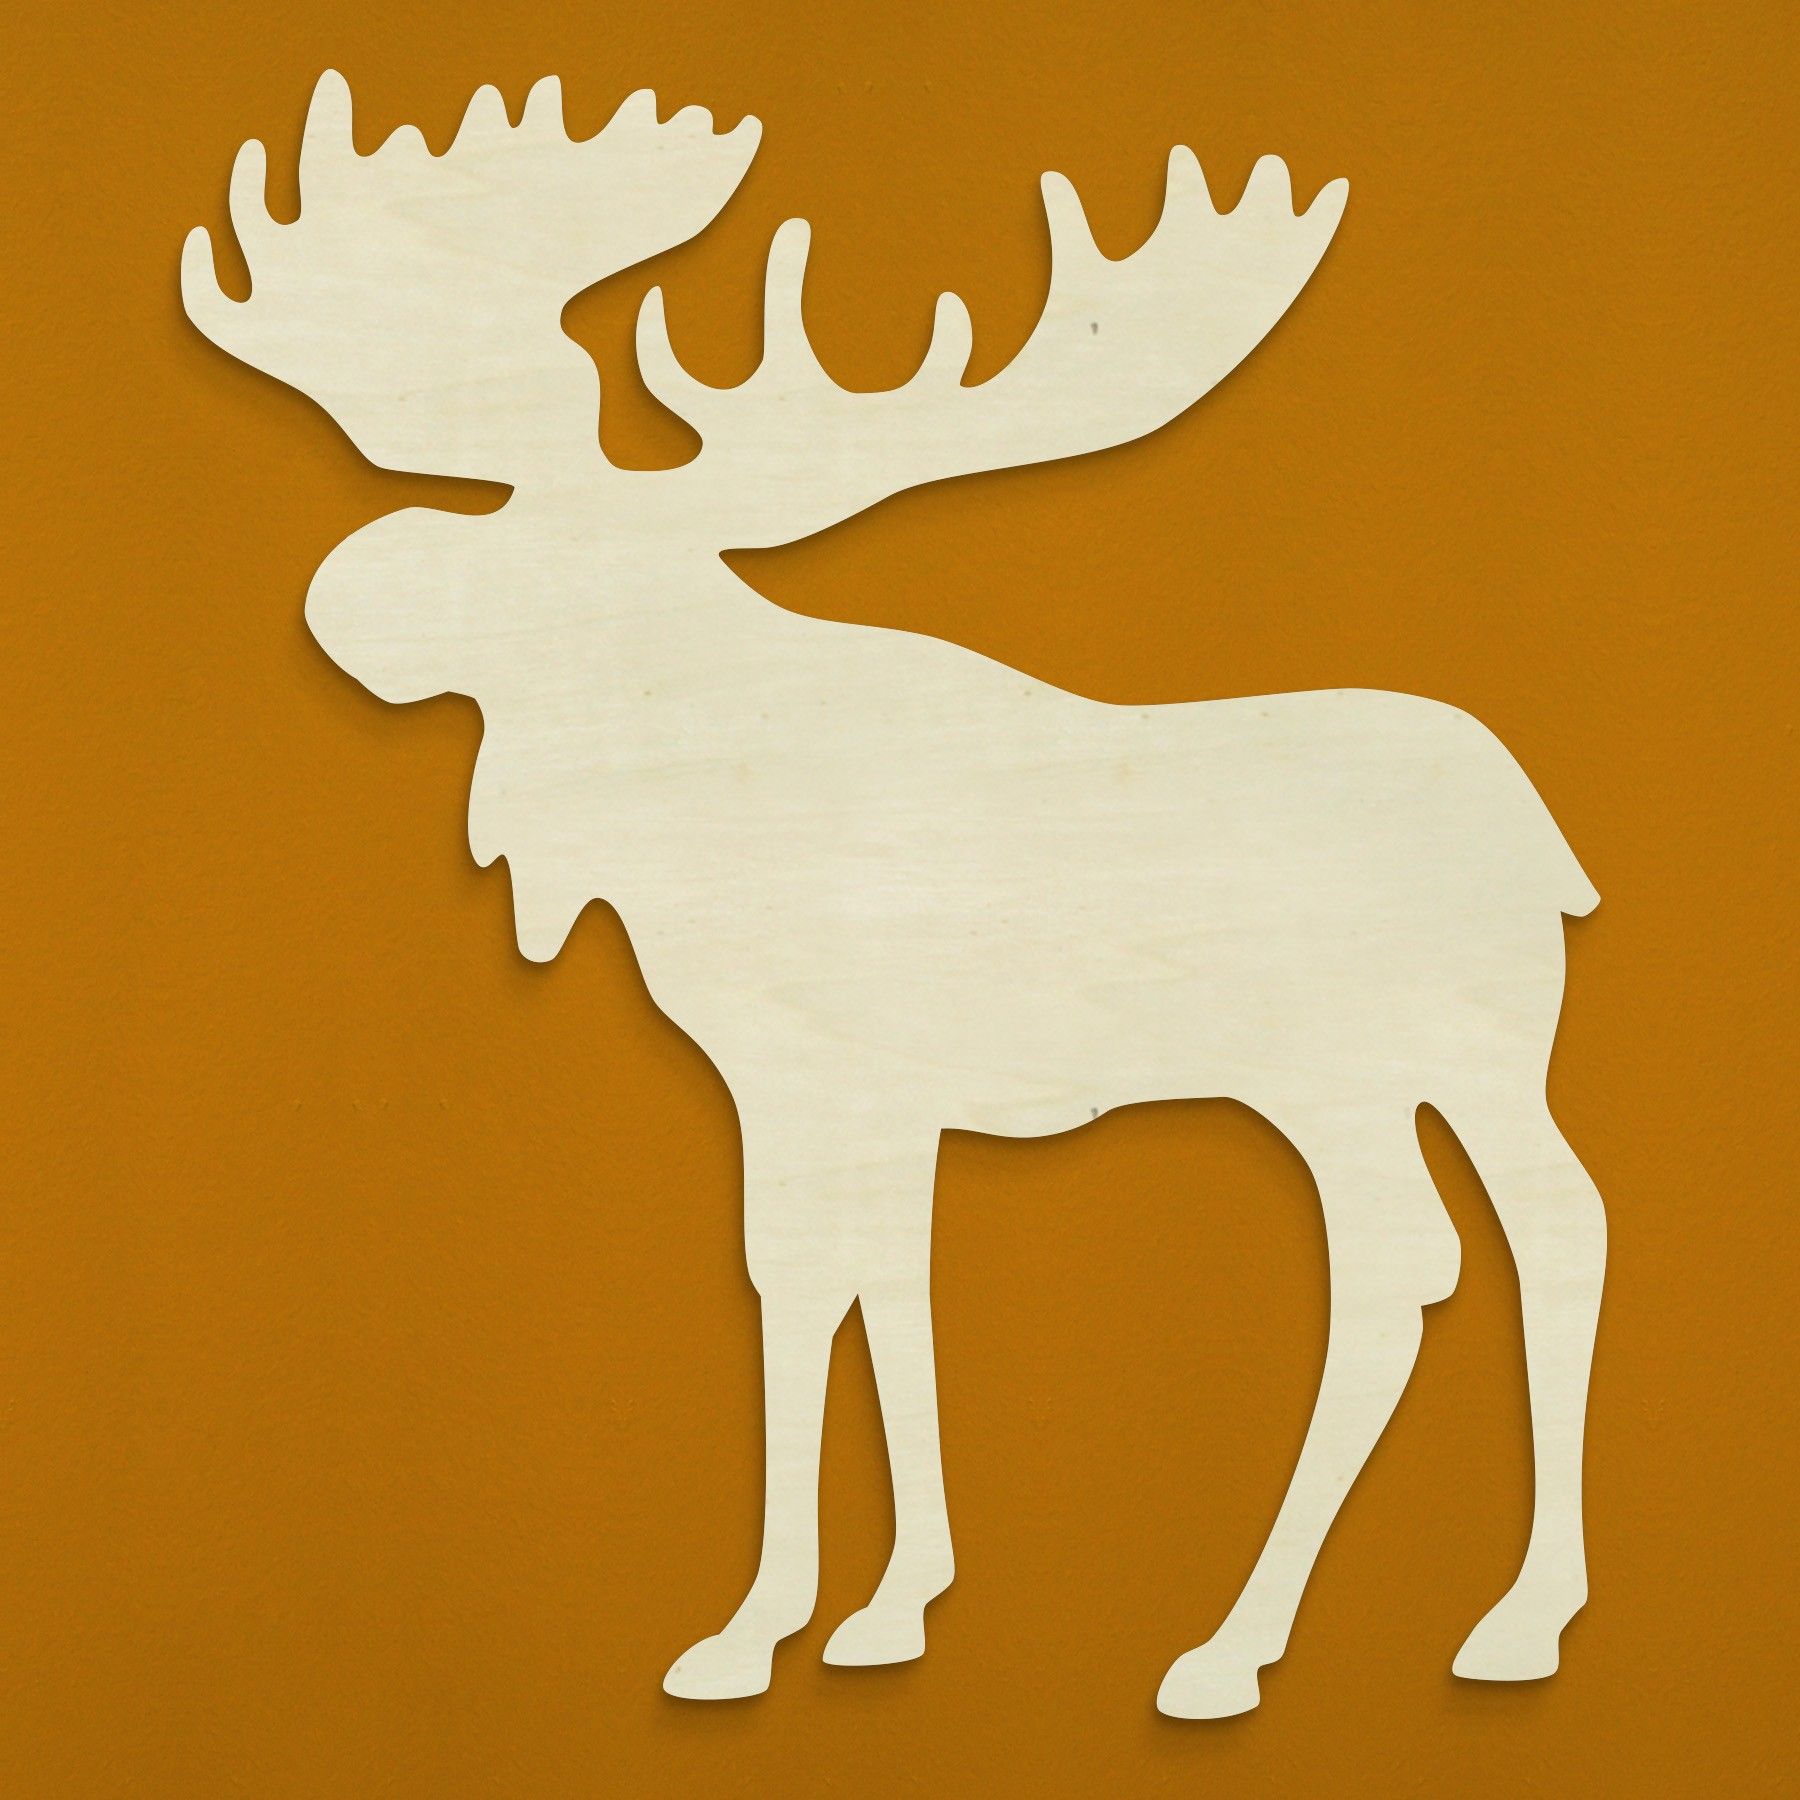 moose clipart woods silhouette